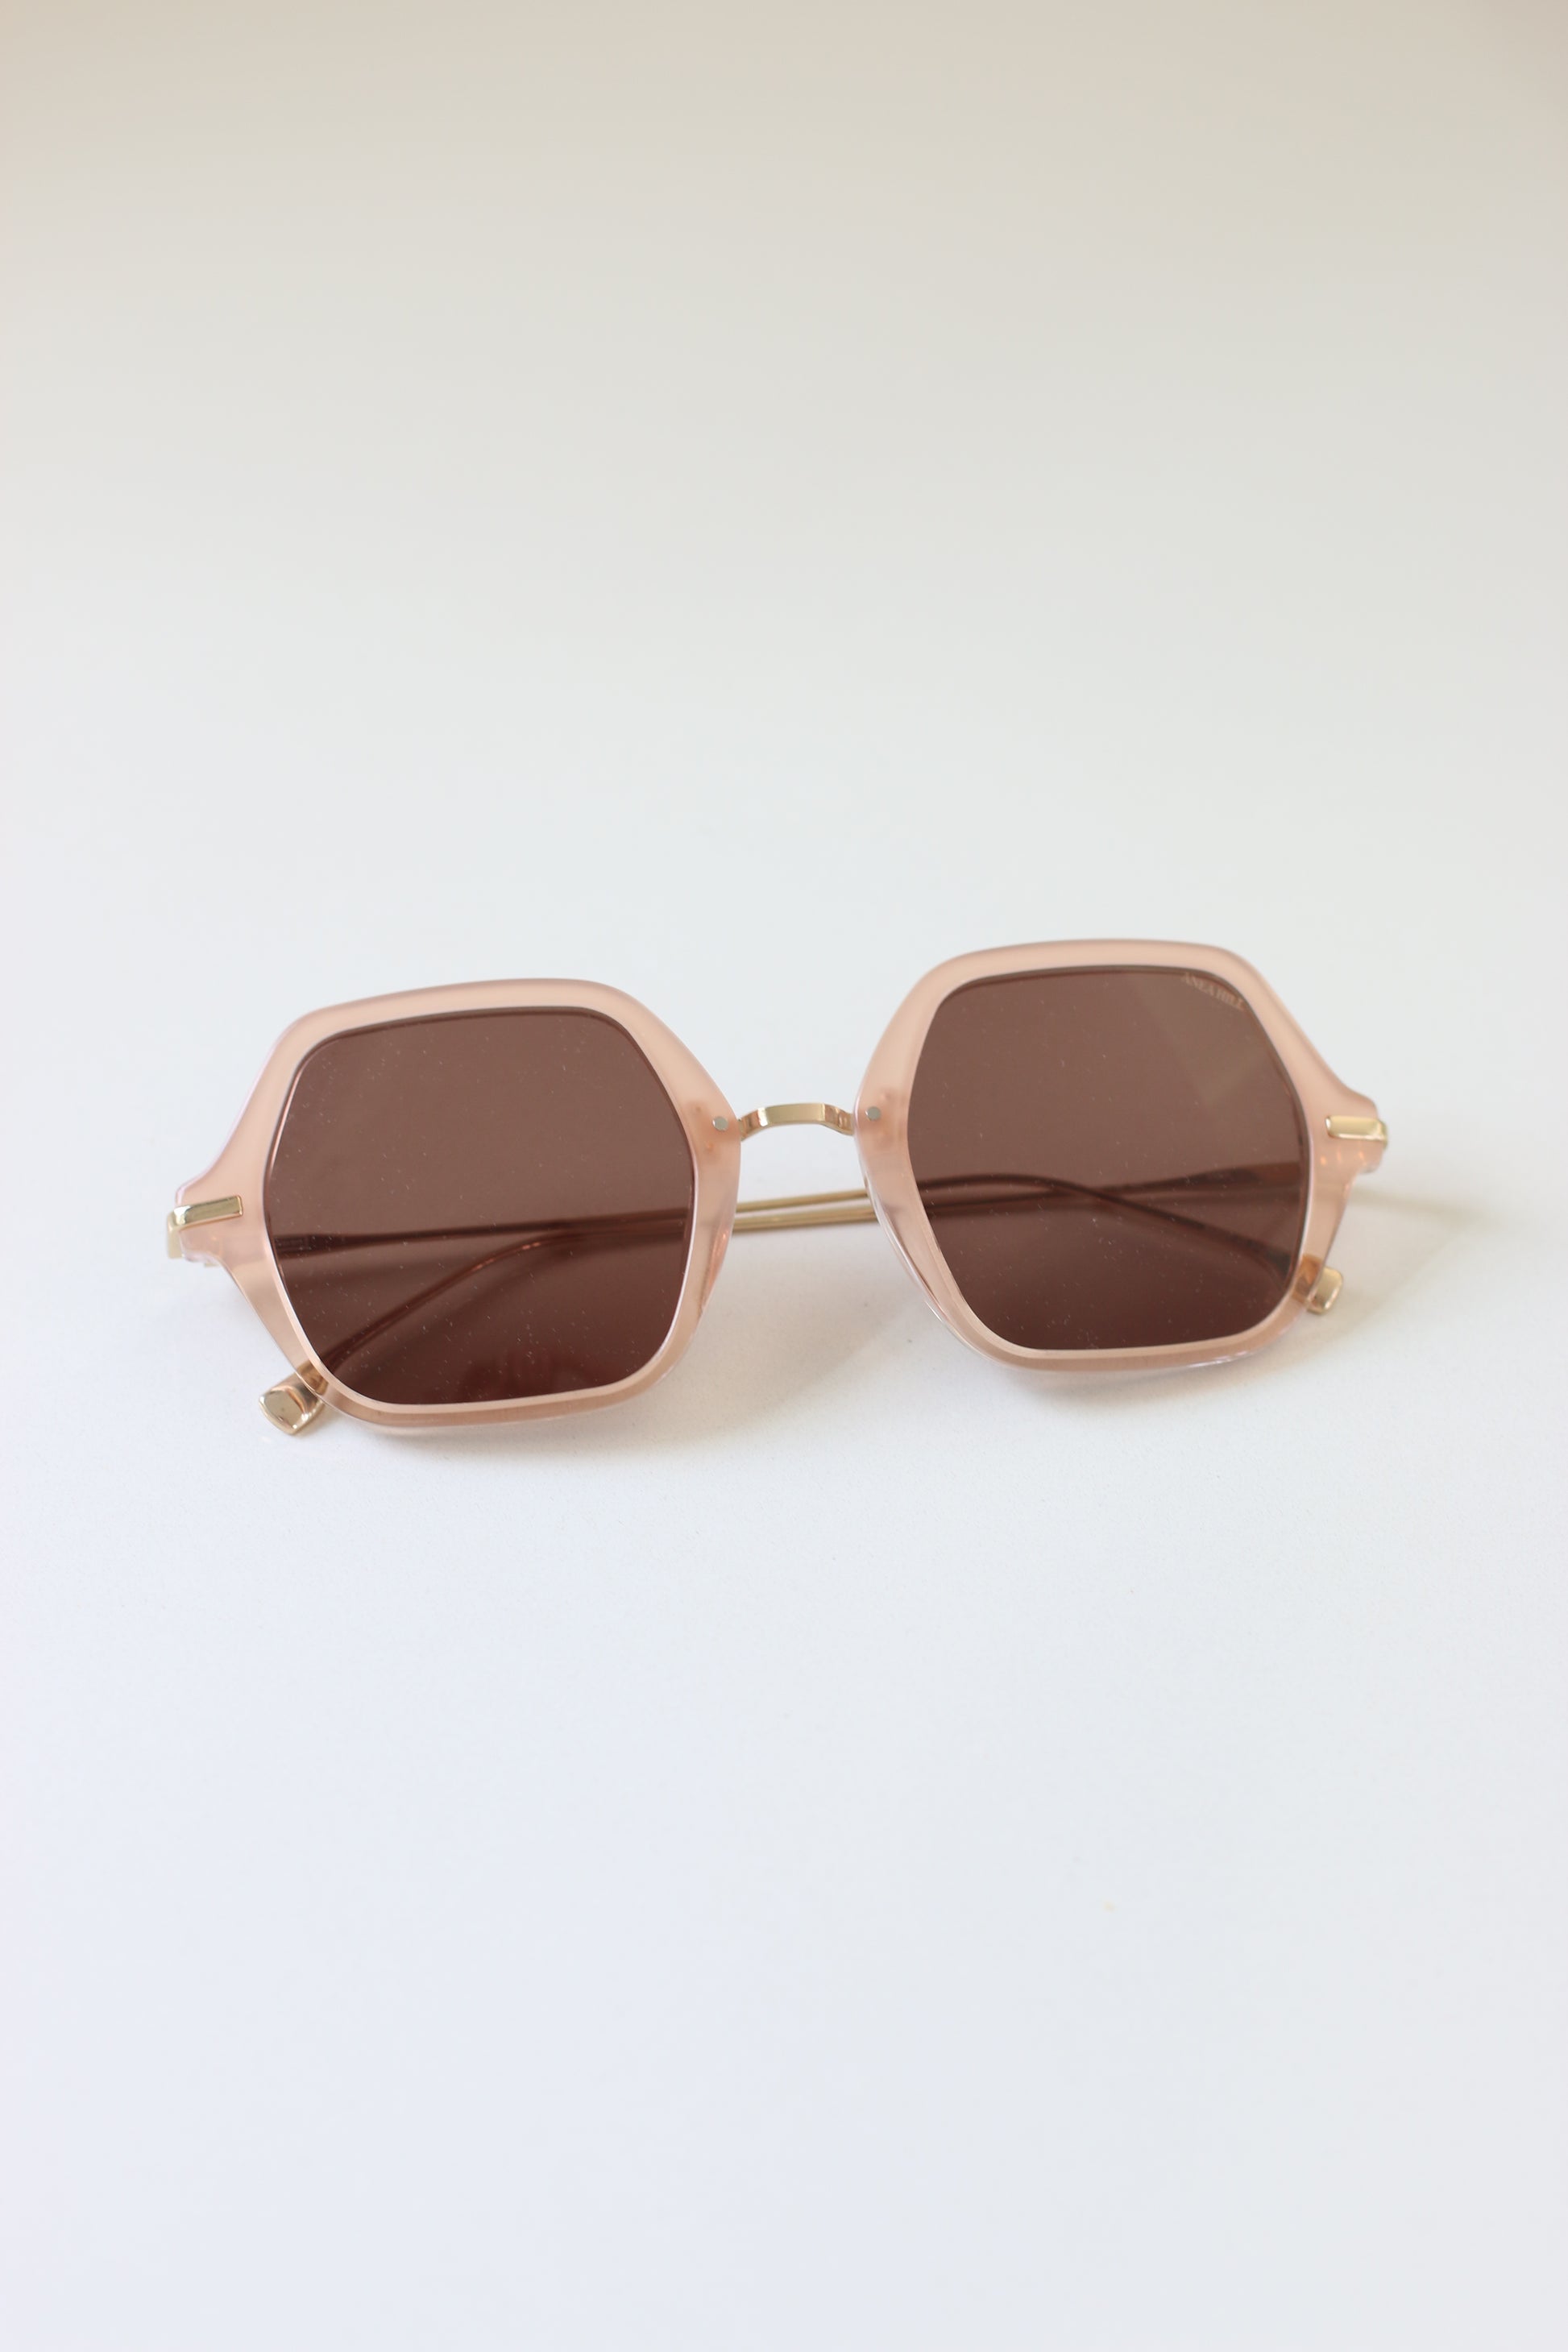 A sophisticated Blush-Colored Sunglasses